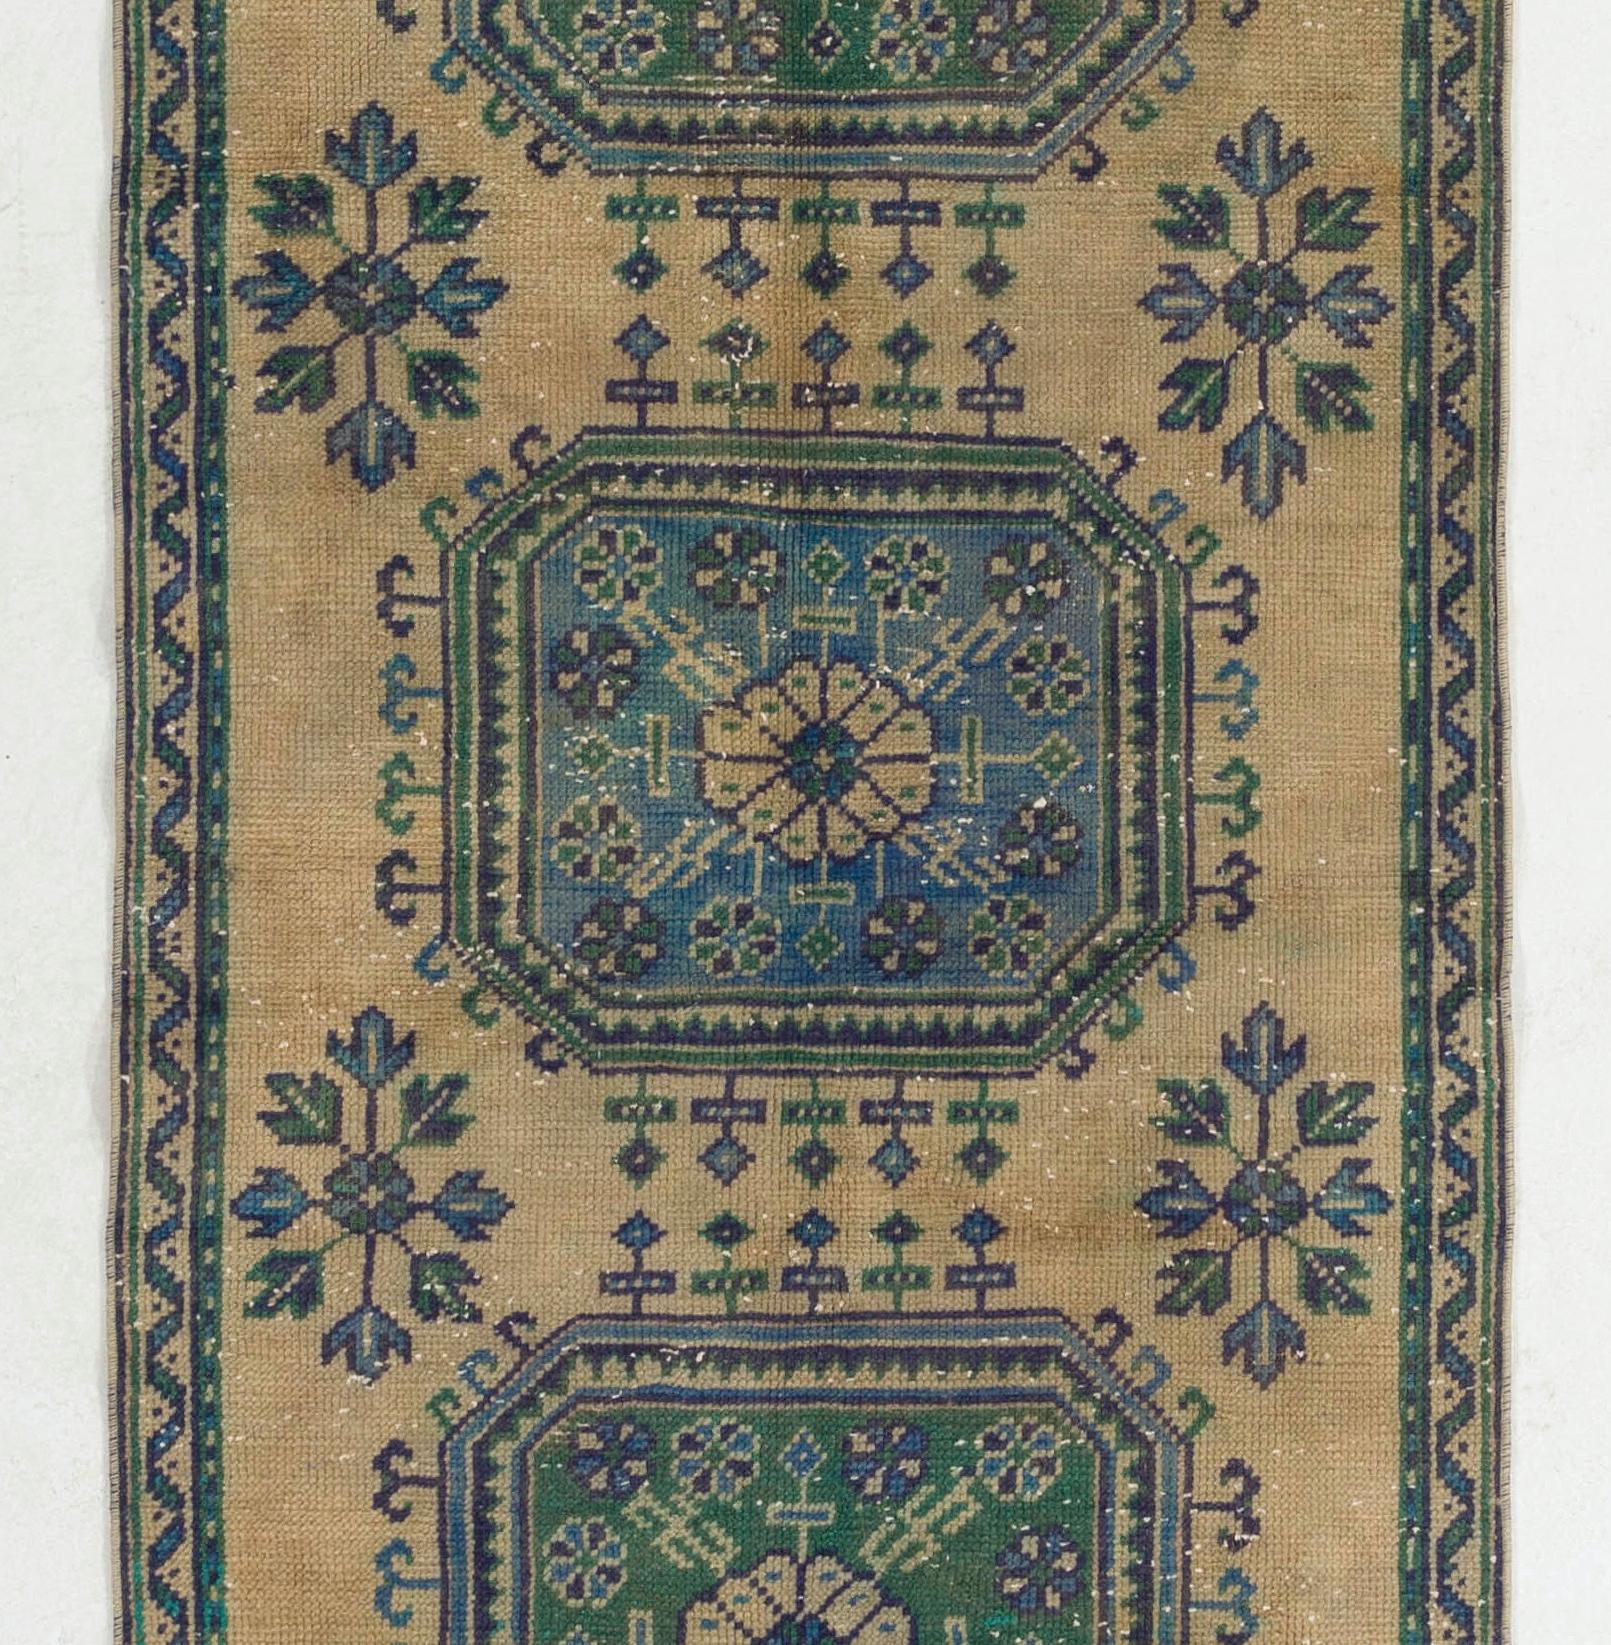 A vintage Turkish runner rug in beige, blue and beautiful hues of green. Finely hand-knotted with even medium wool pile on cotton foundation. In very good condition. Washed professionally. 
Sturdy and can be used on a high traffic area, suitable for